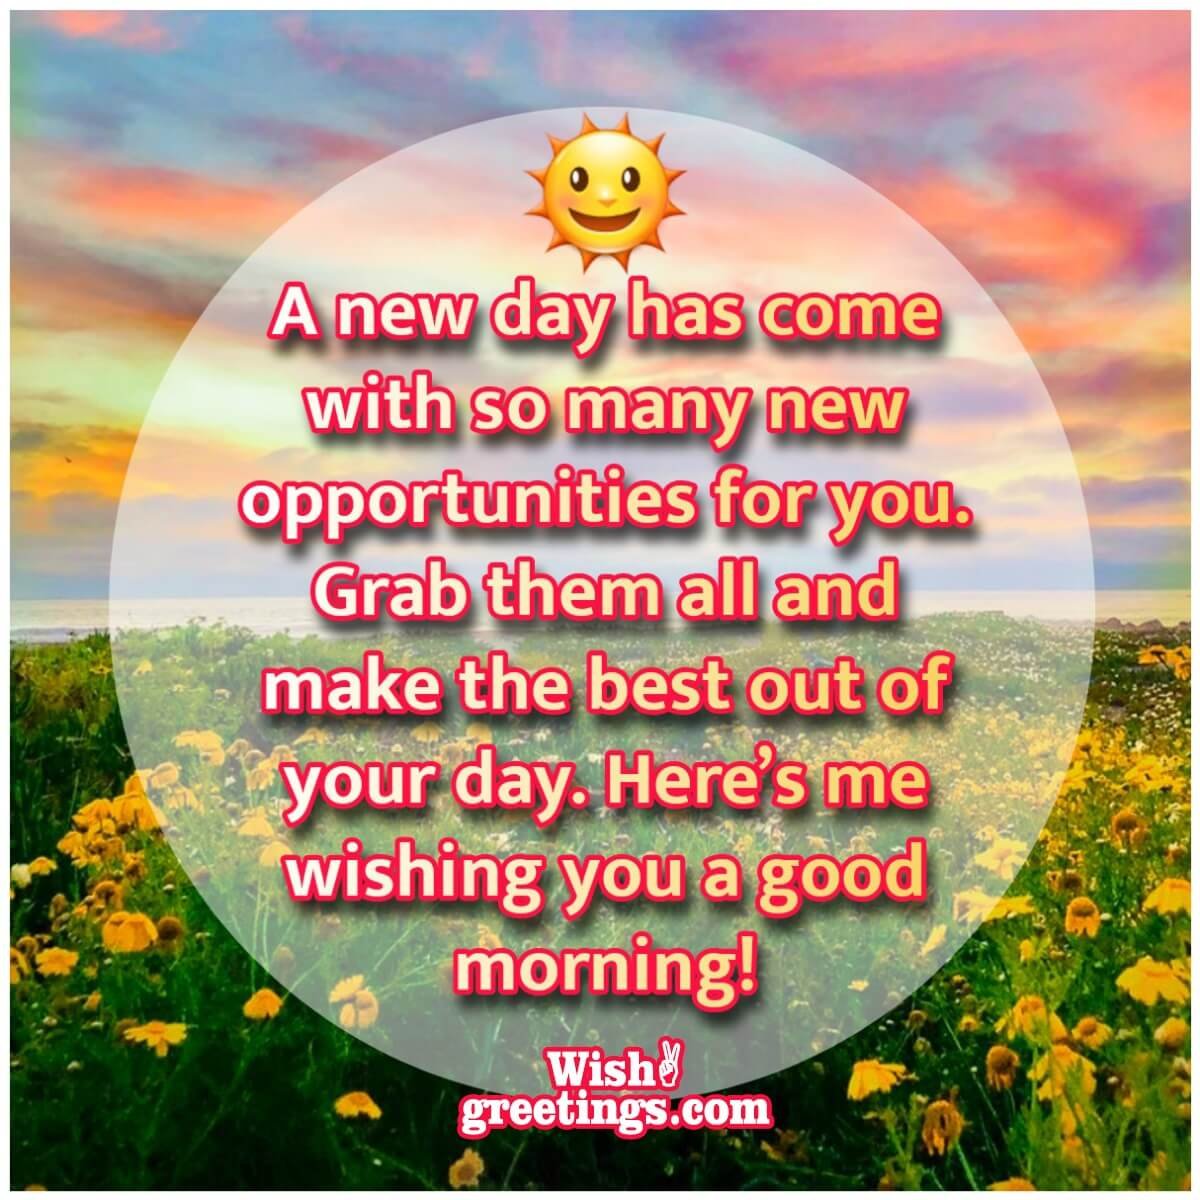 Sweet Good Morning Messages - Wish Greetings